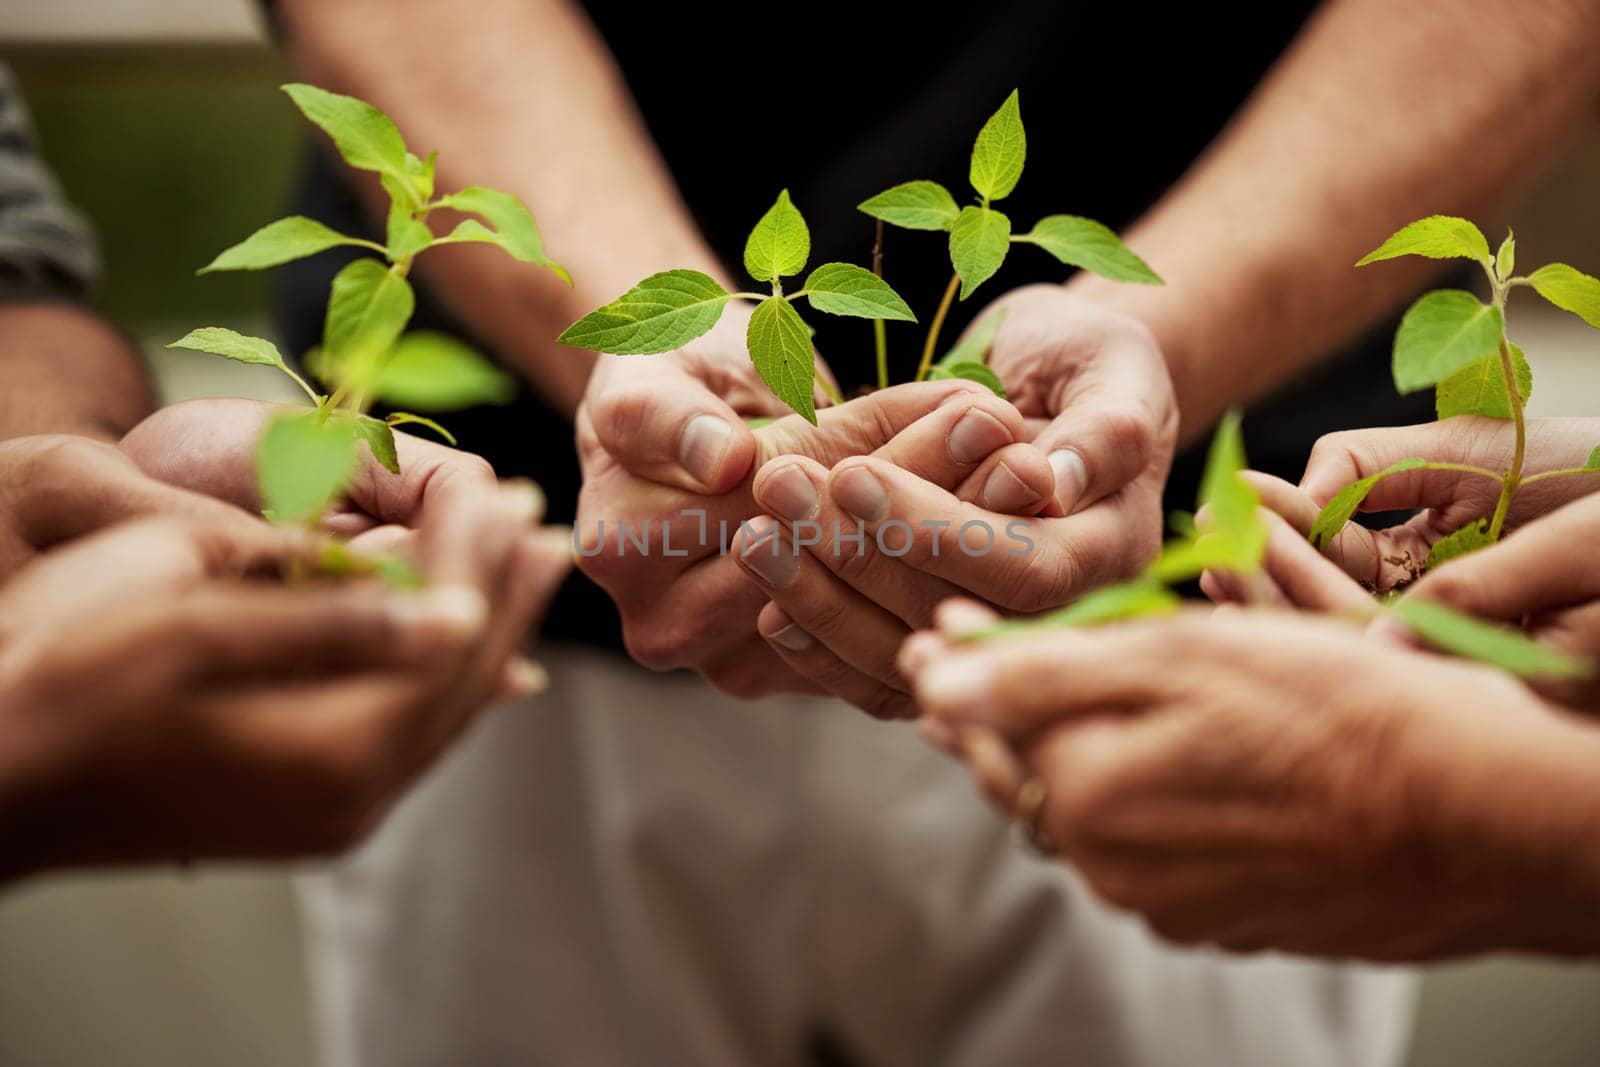 Hands, plants and grow with people or team, business and eco friendly for earth day and collaboration for growth. Investment, environment and community service, nurture or agro for sustainability by YuriArcurs